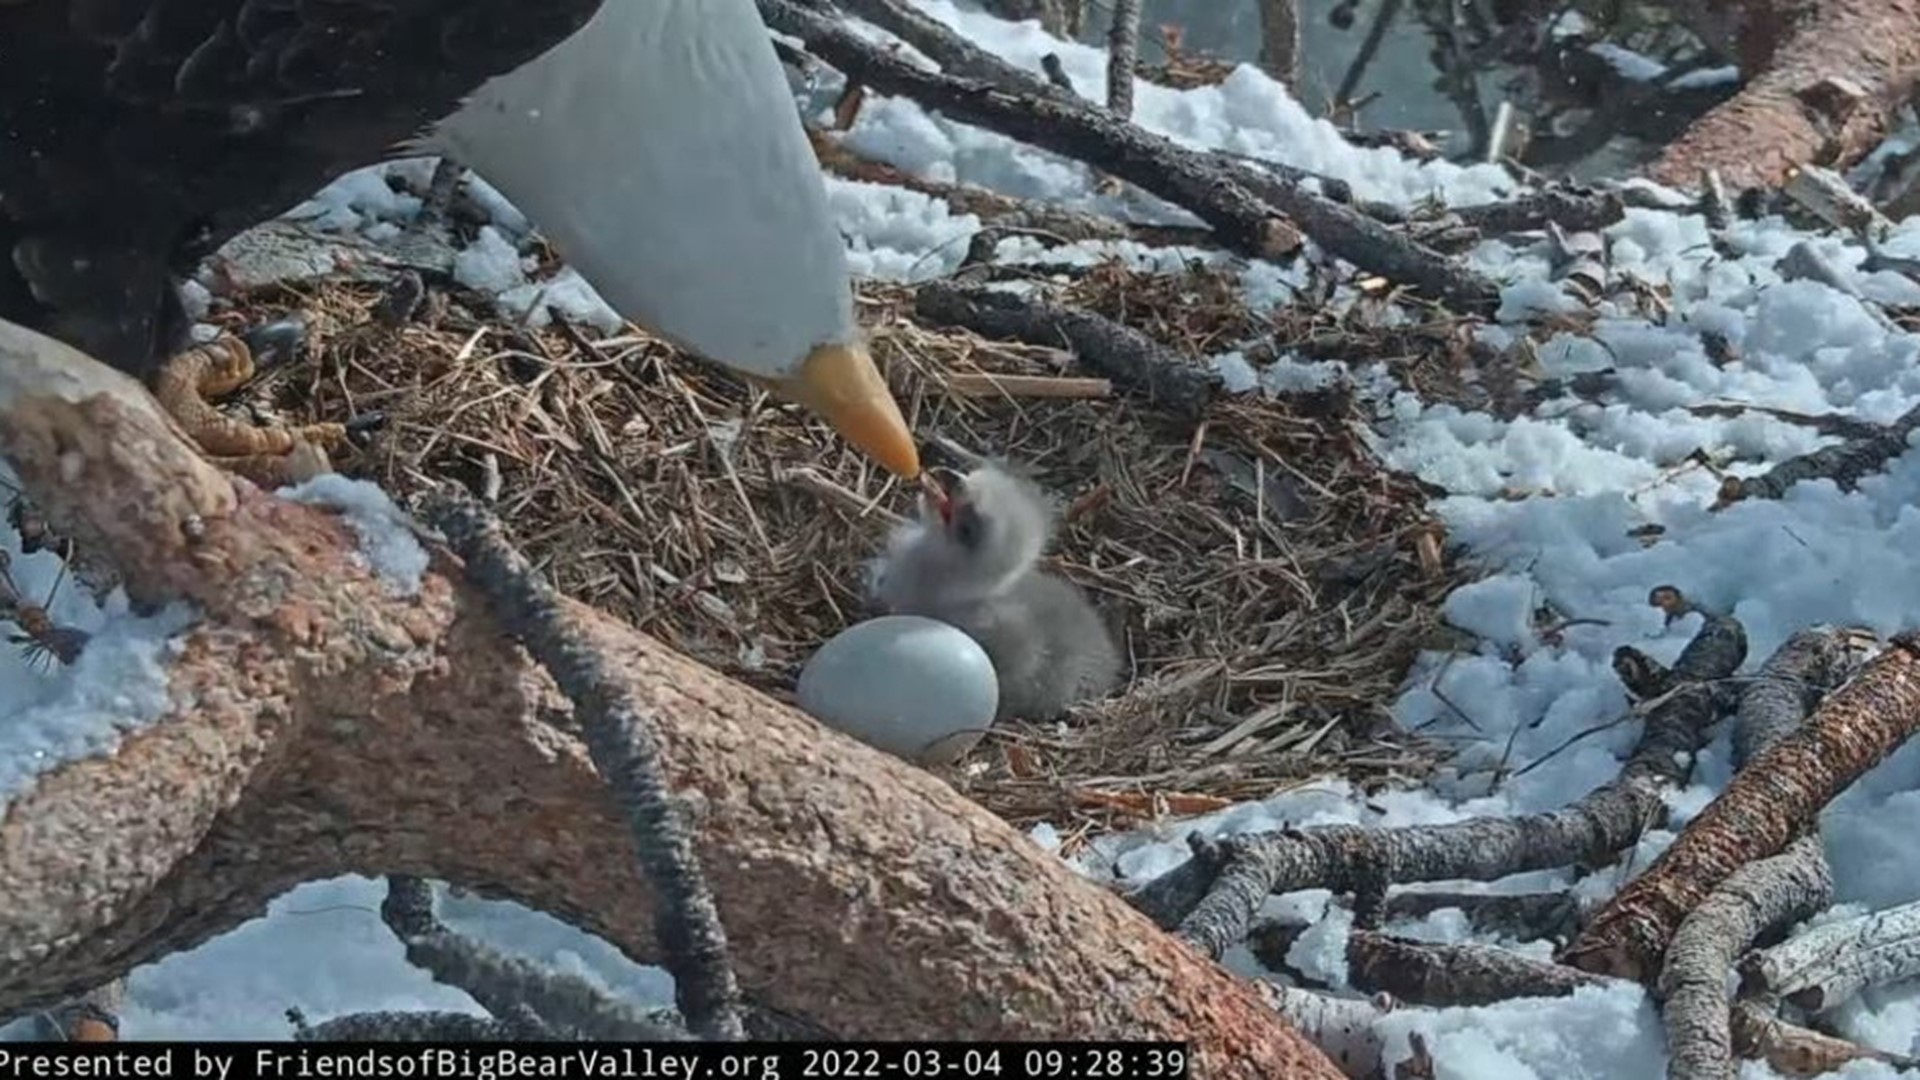 Video shot on Friday shows a bald eagle pair in California caring for a newly-hatched chick in a snowy nest.